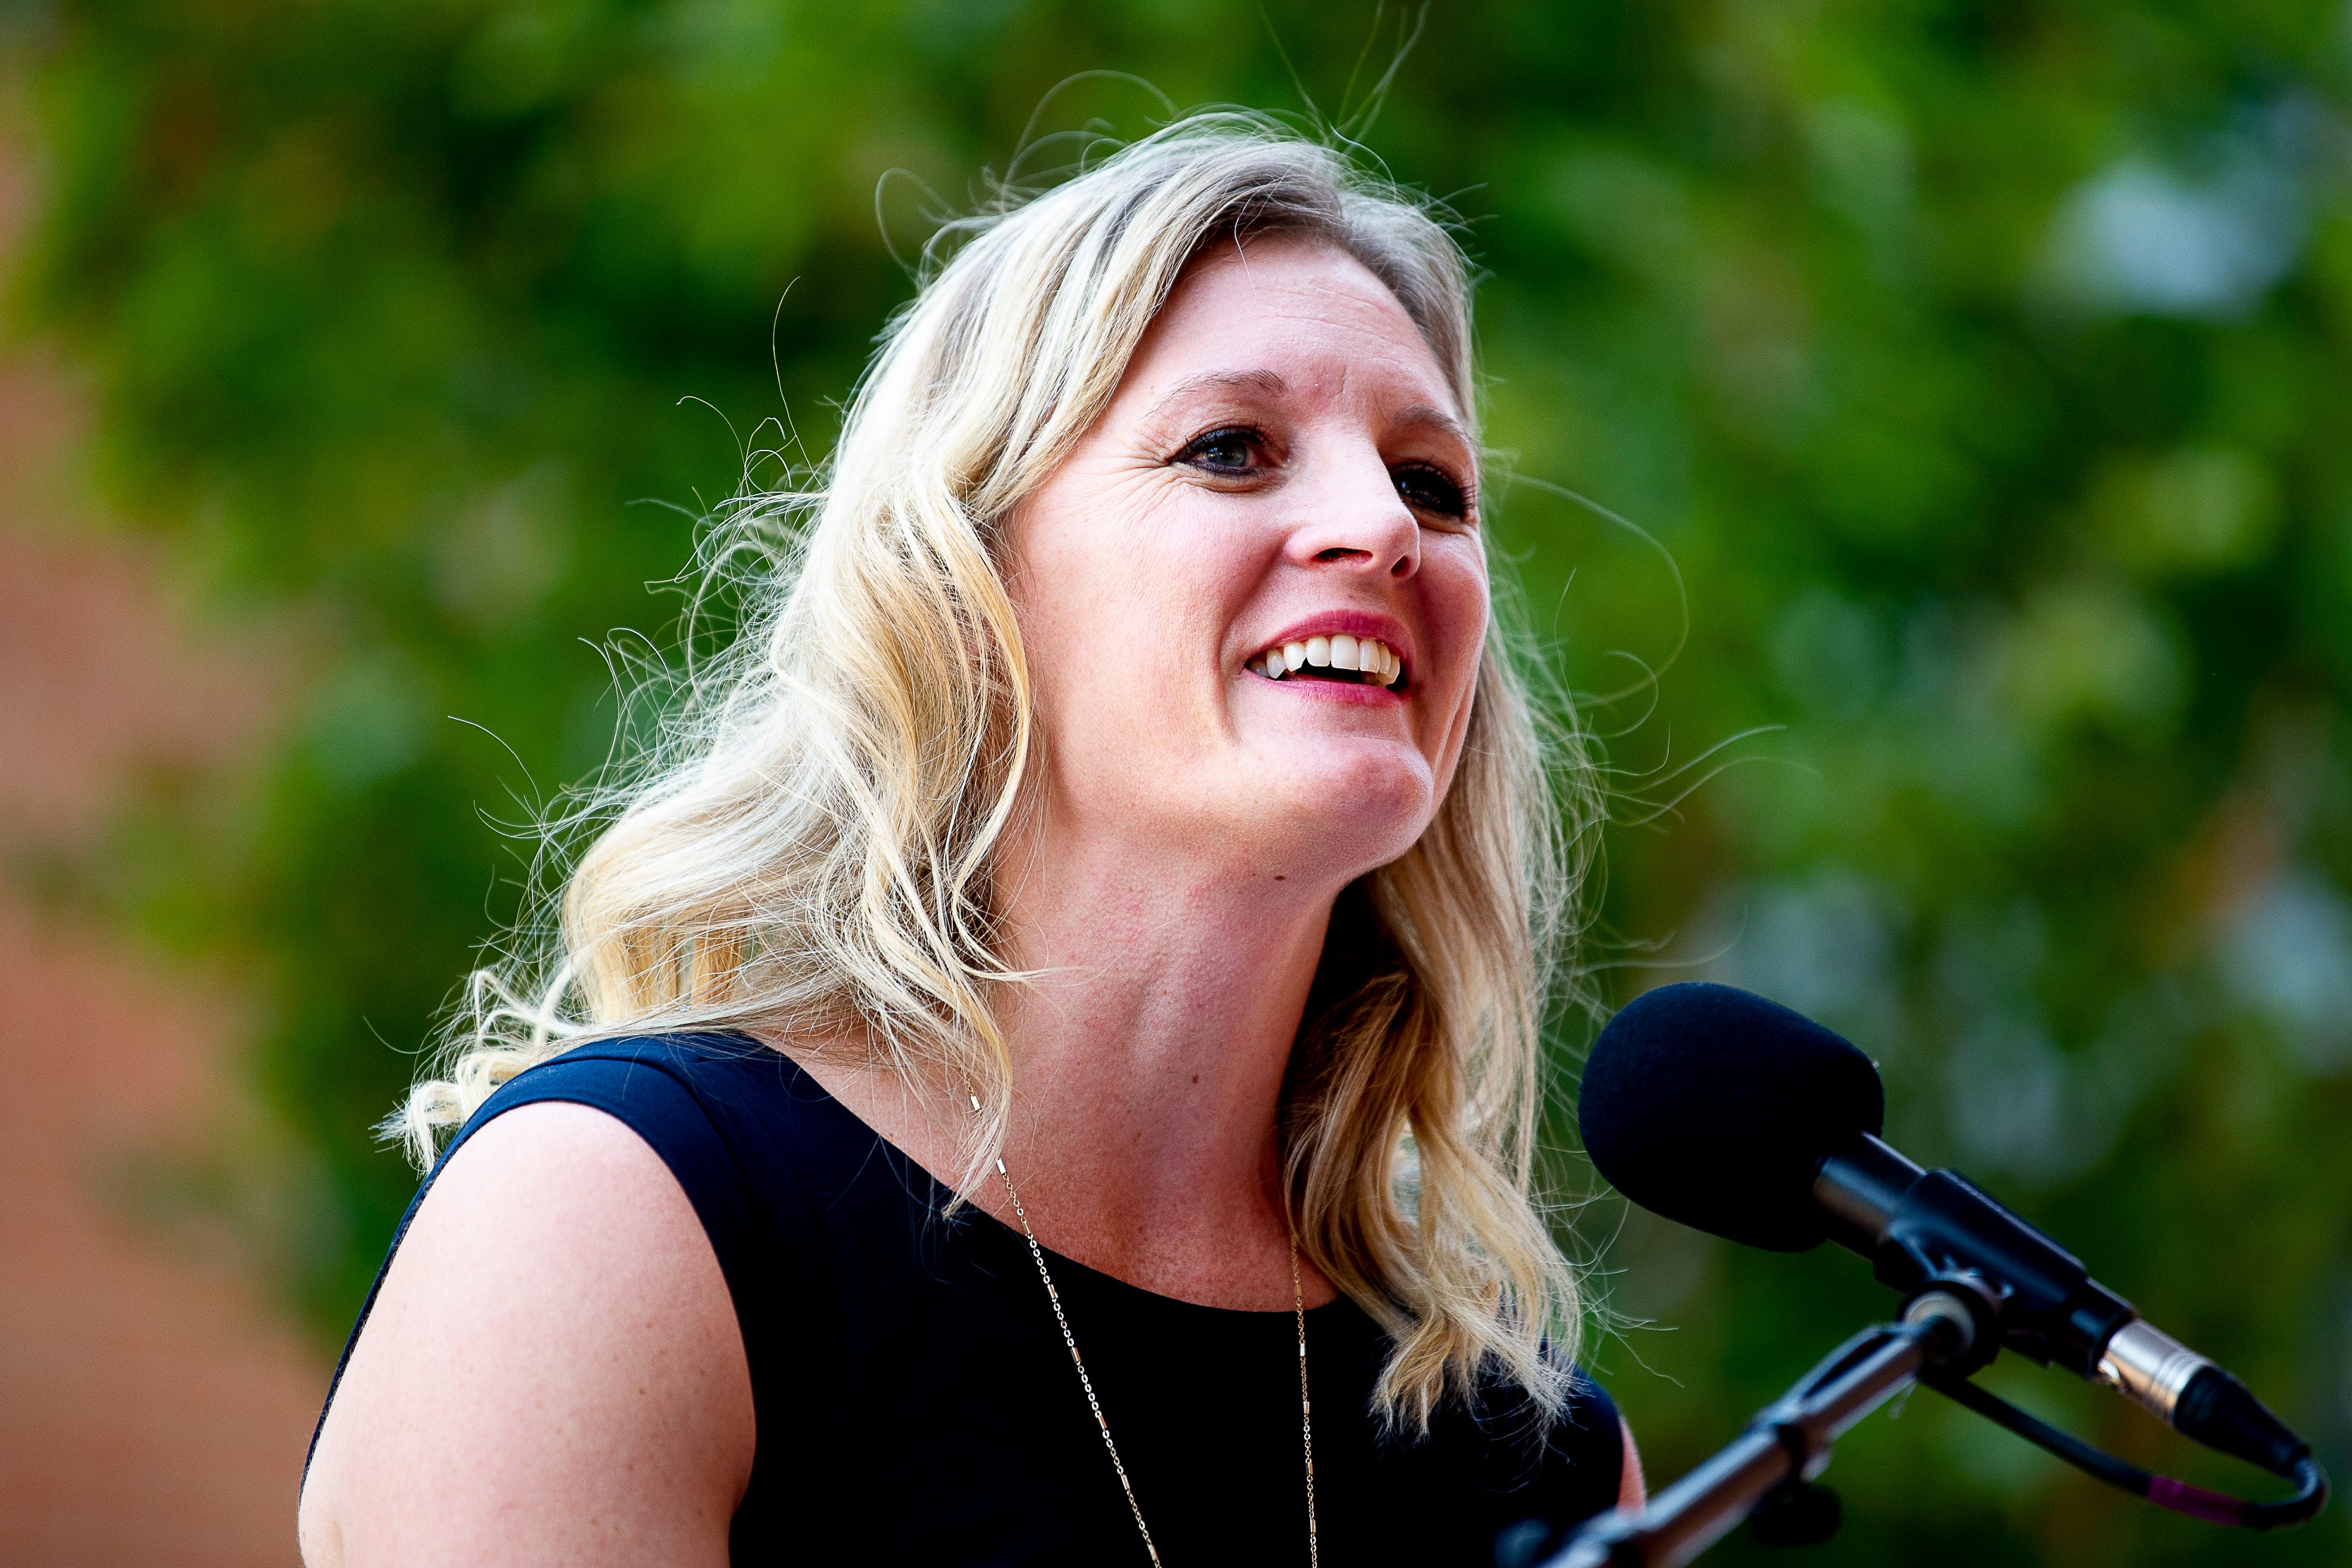 Tennessee Lady Vols coach Kellie Harper speaks during a dedication ceremony of the Doug Dickey Hall of Fame Plaza at the Neyland-Thompson Sports Complex in Knoxville, Tennessee on Friday, October 4, 2019. Dickey led UT to its second SEC title in 1969 and served as the Vols' Director of Athletics from 1986 to 2003.